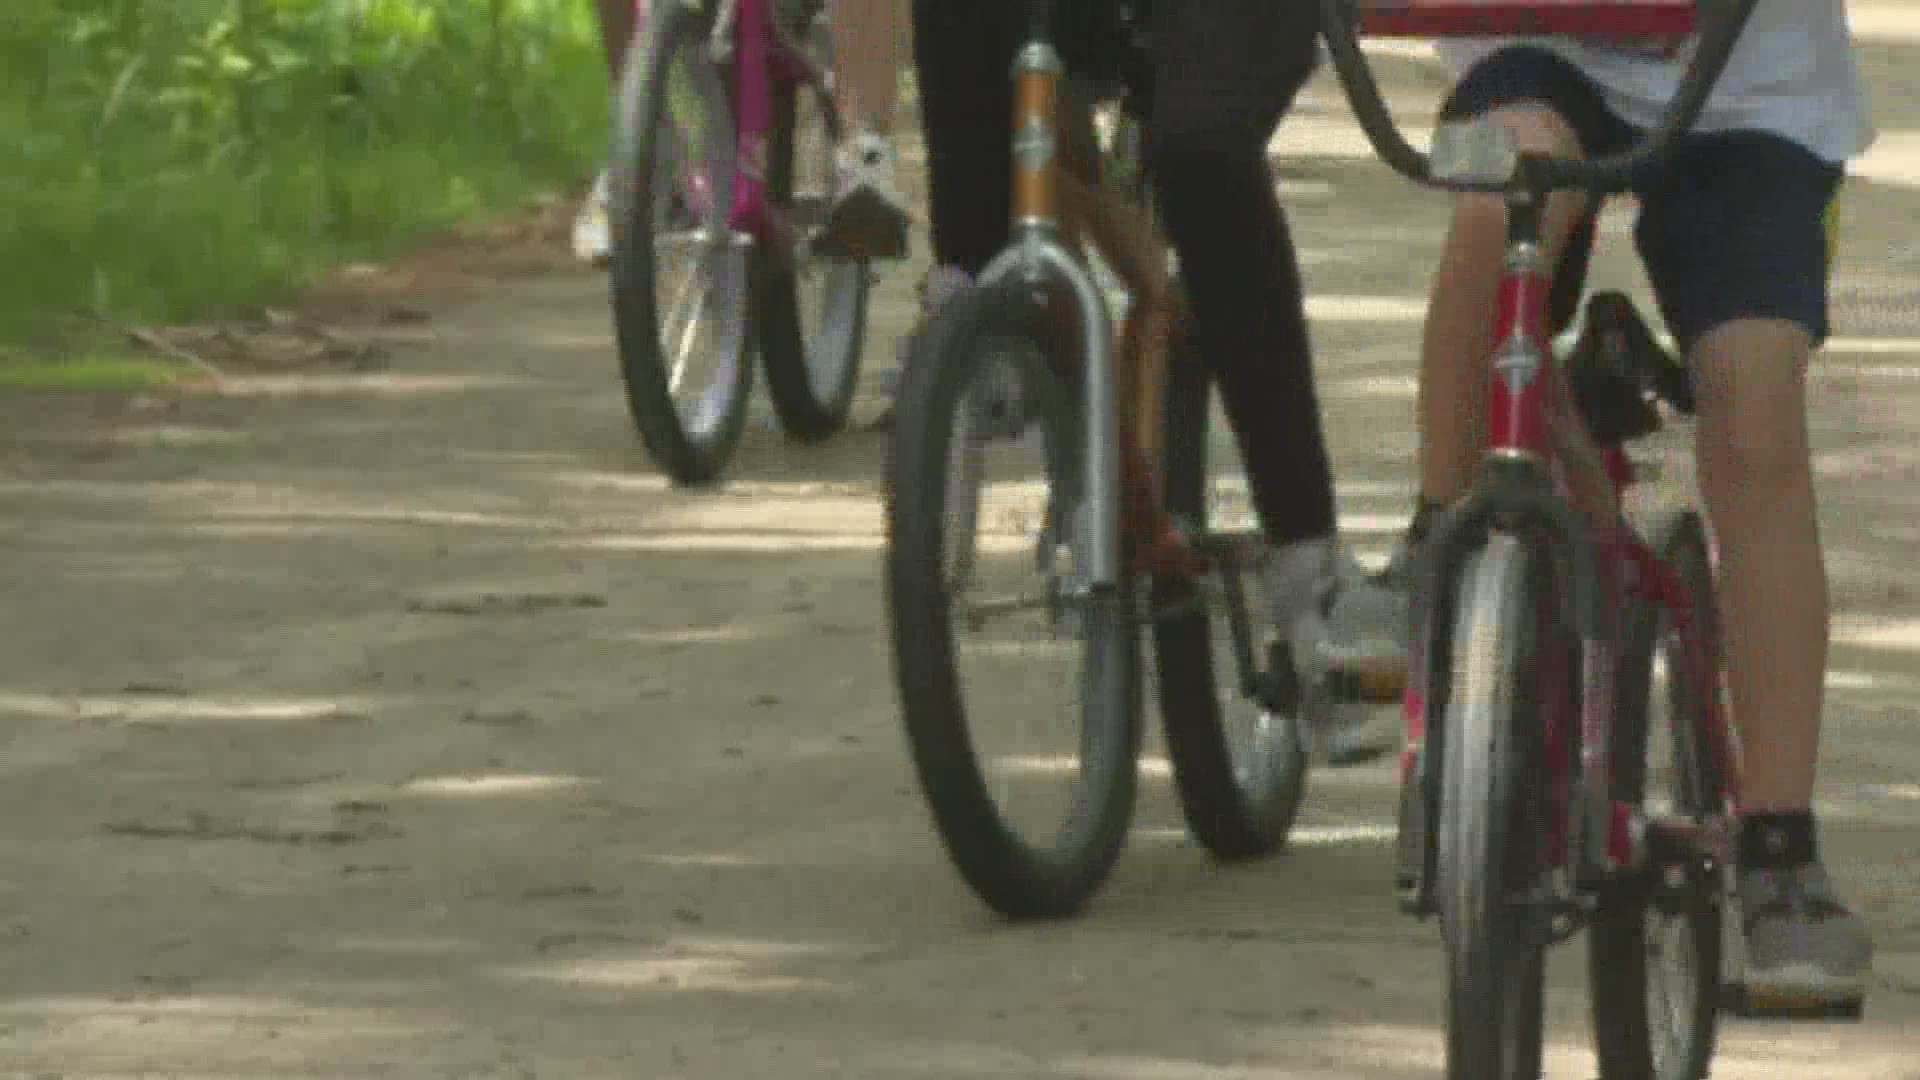 The program aims to teach Mainers about bike safety and mechanics, as well as provide them with a refurbished bicycle and some equipment including a helmet and lock.